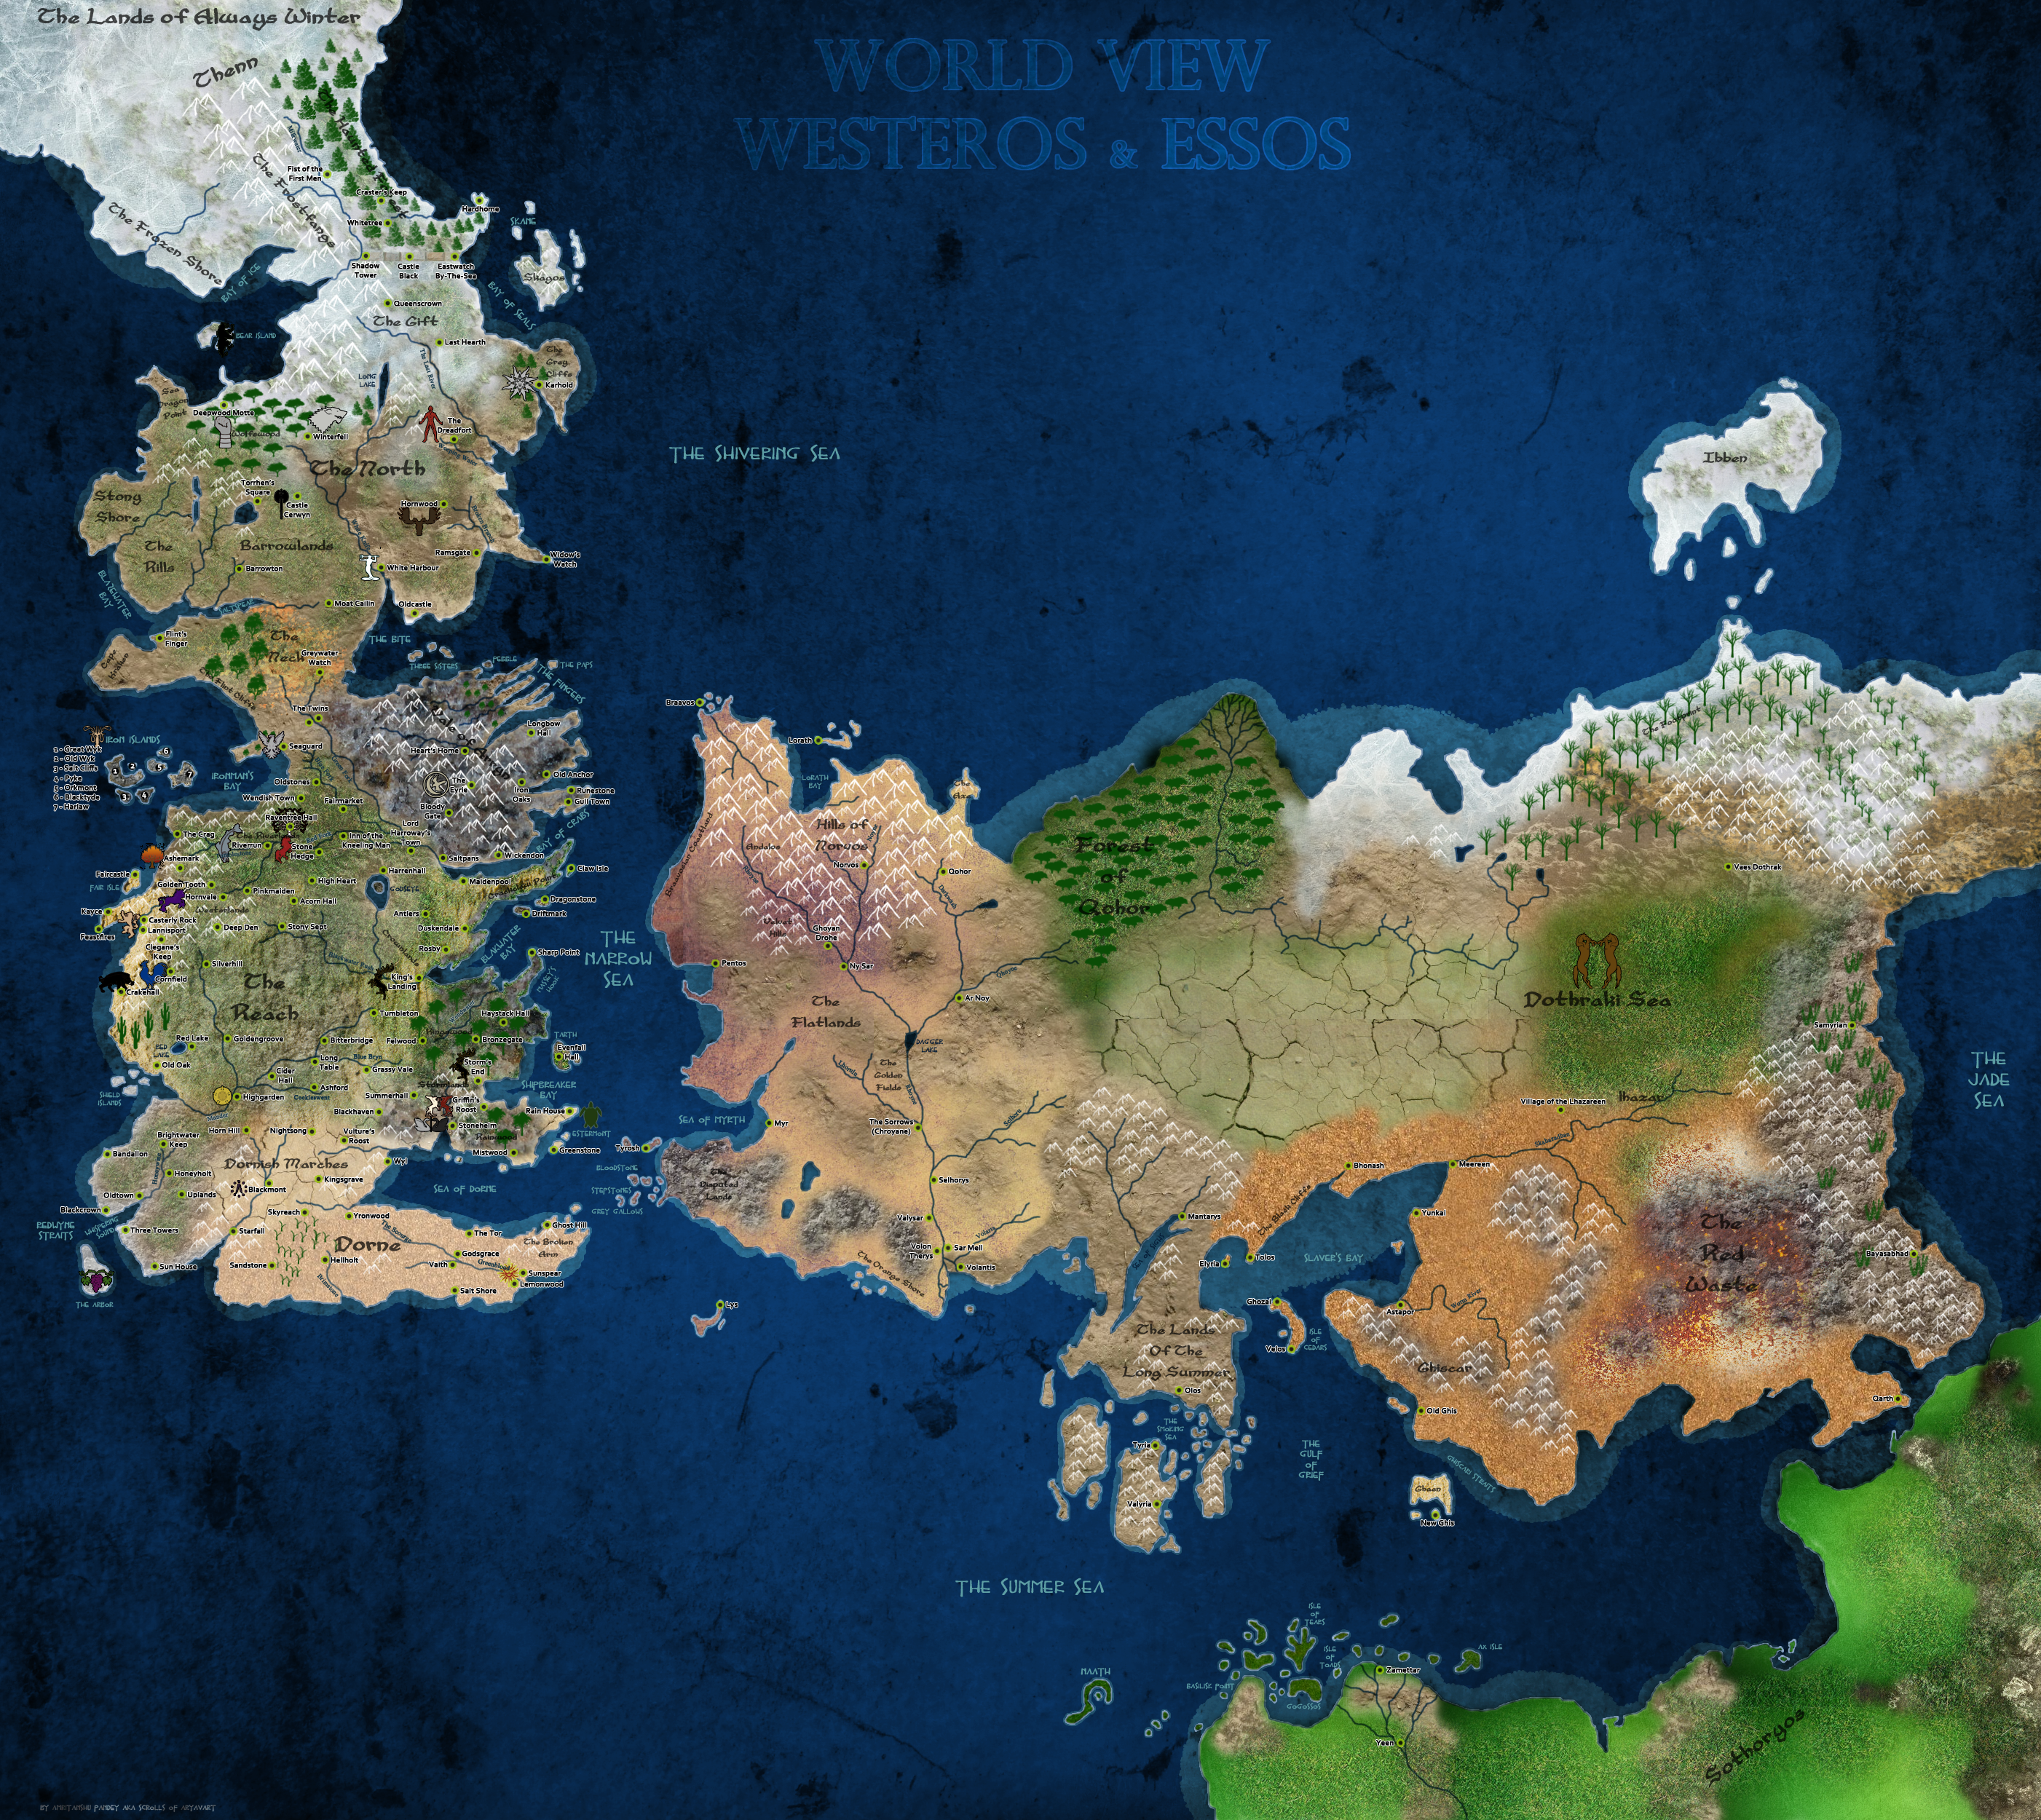 a-map-of-a-song-of-ice-and-fire-version-3-by-scrollsofaryavart-on